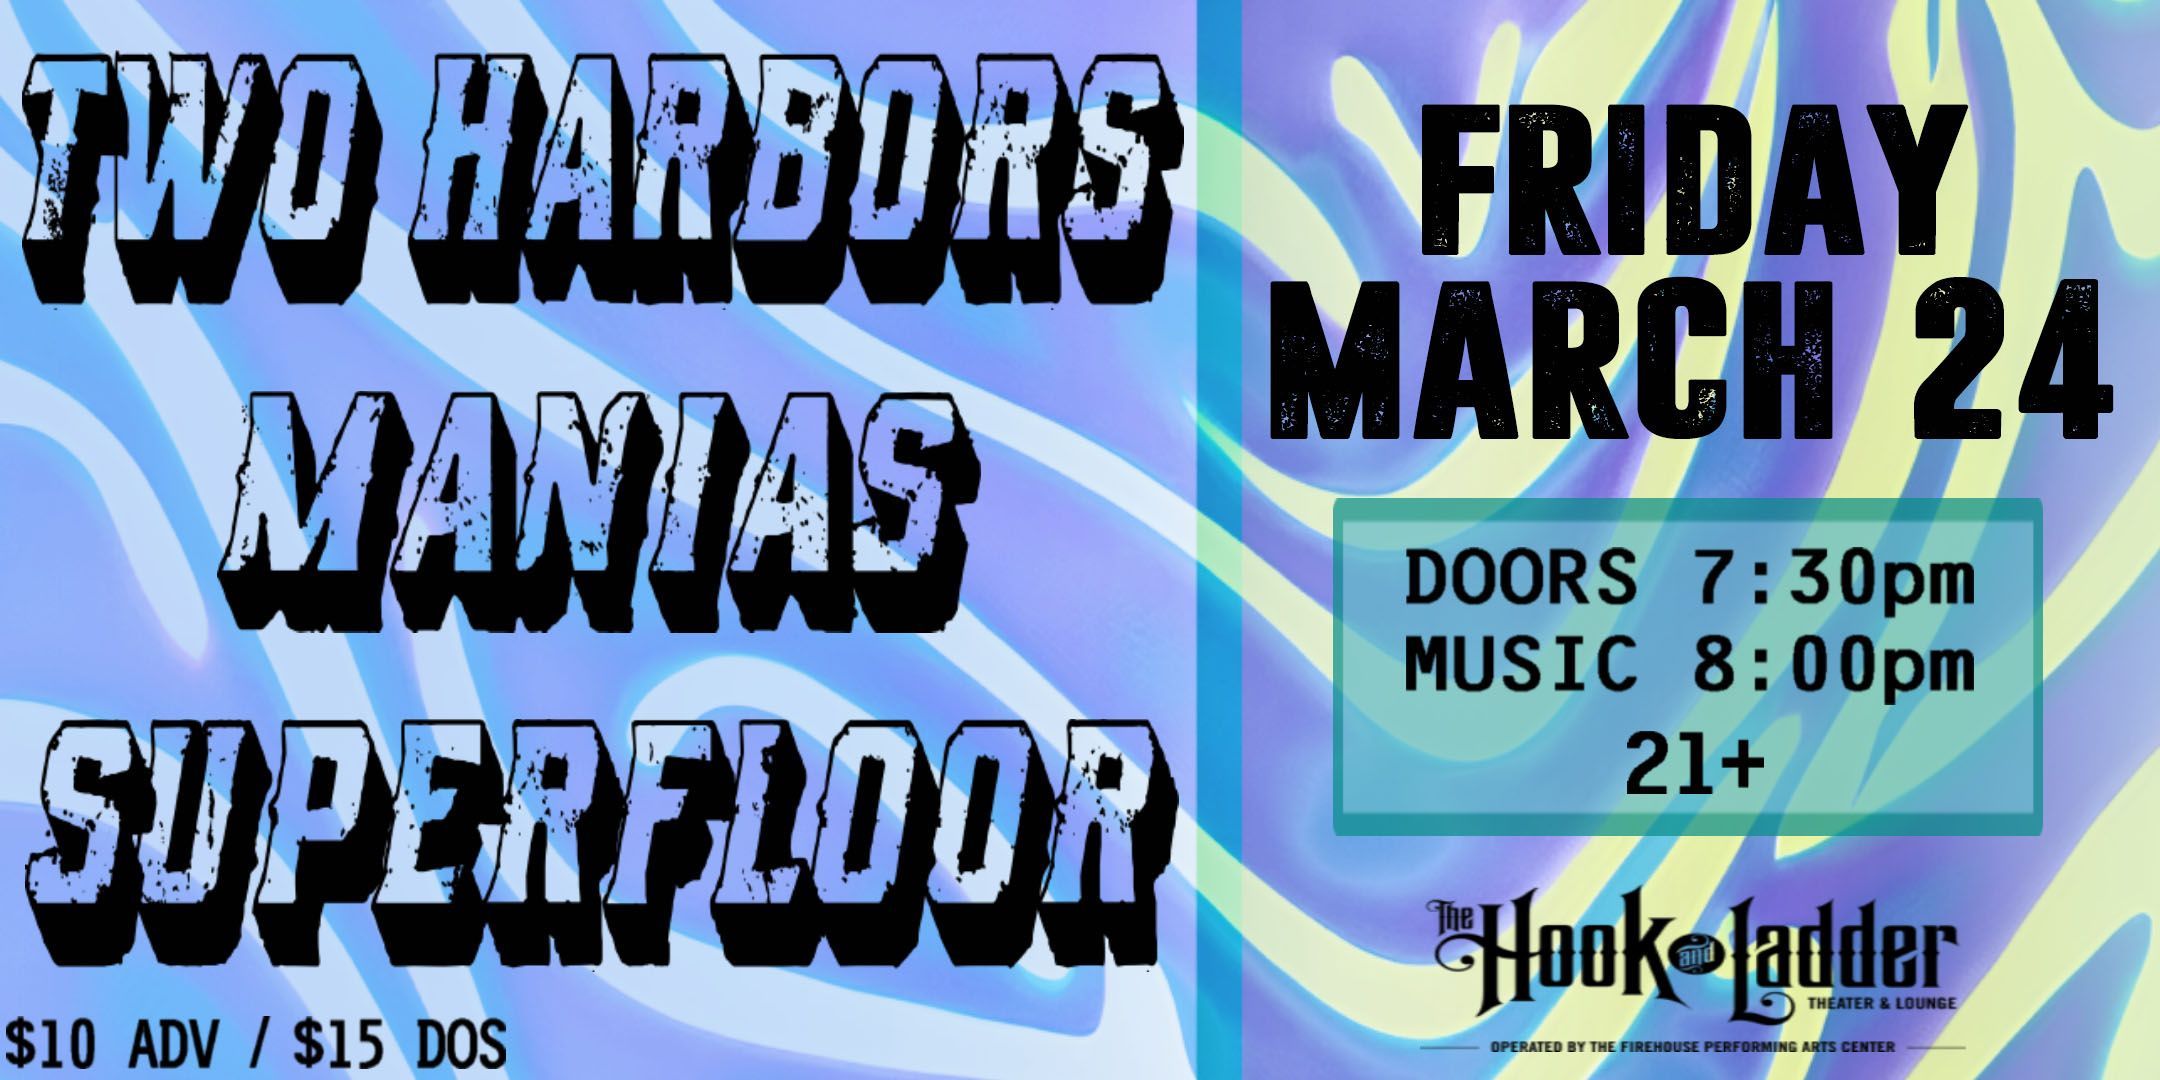 Two Harbors Manias Superfloor Friday March 24 The Hook and Ladder Theater Doors 7:30pm :: Music 8:00pm :: 21+ General Admission $10 ADV / $15 DOS NO REFUNDS